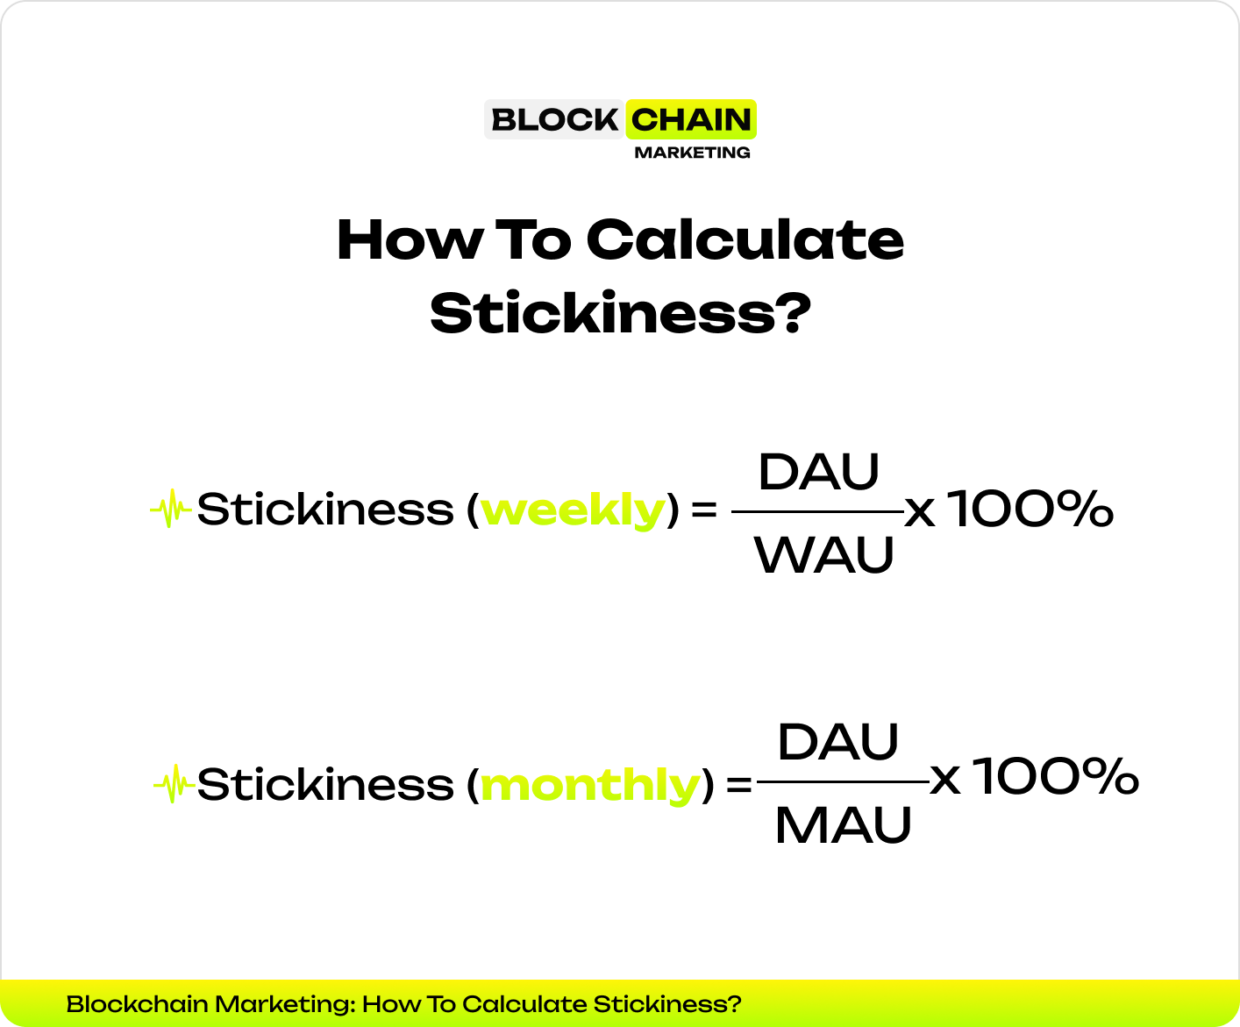 How To Calculate Stickiness?